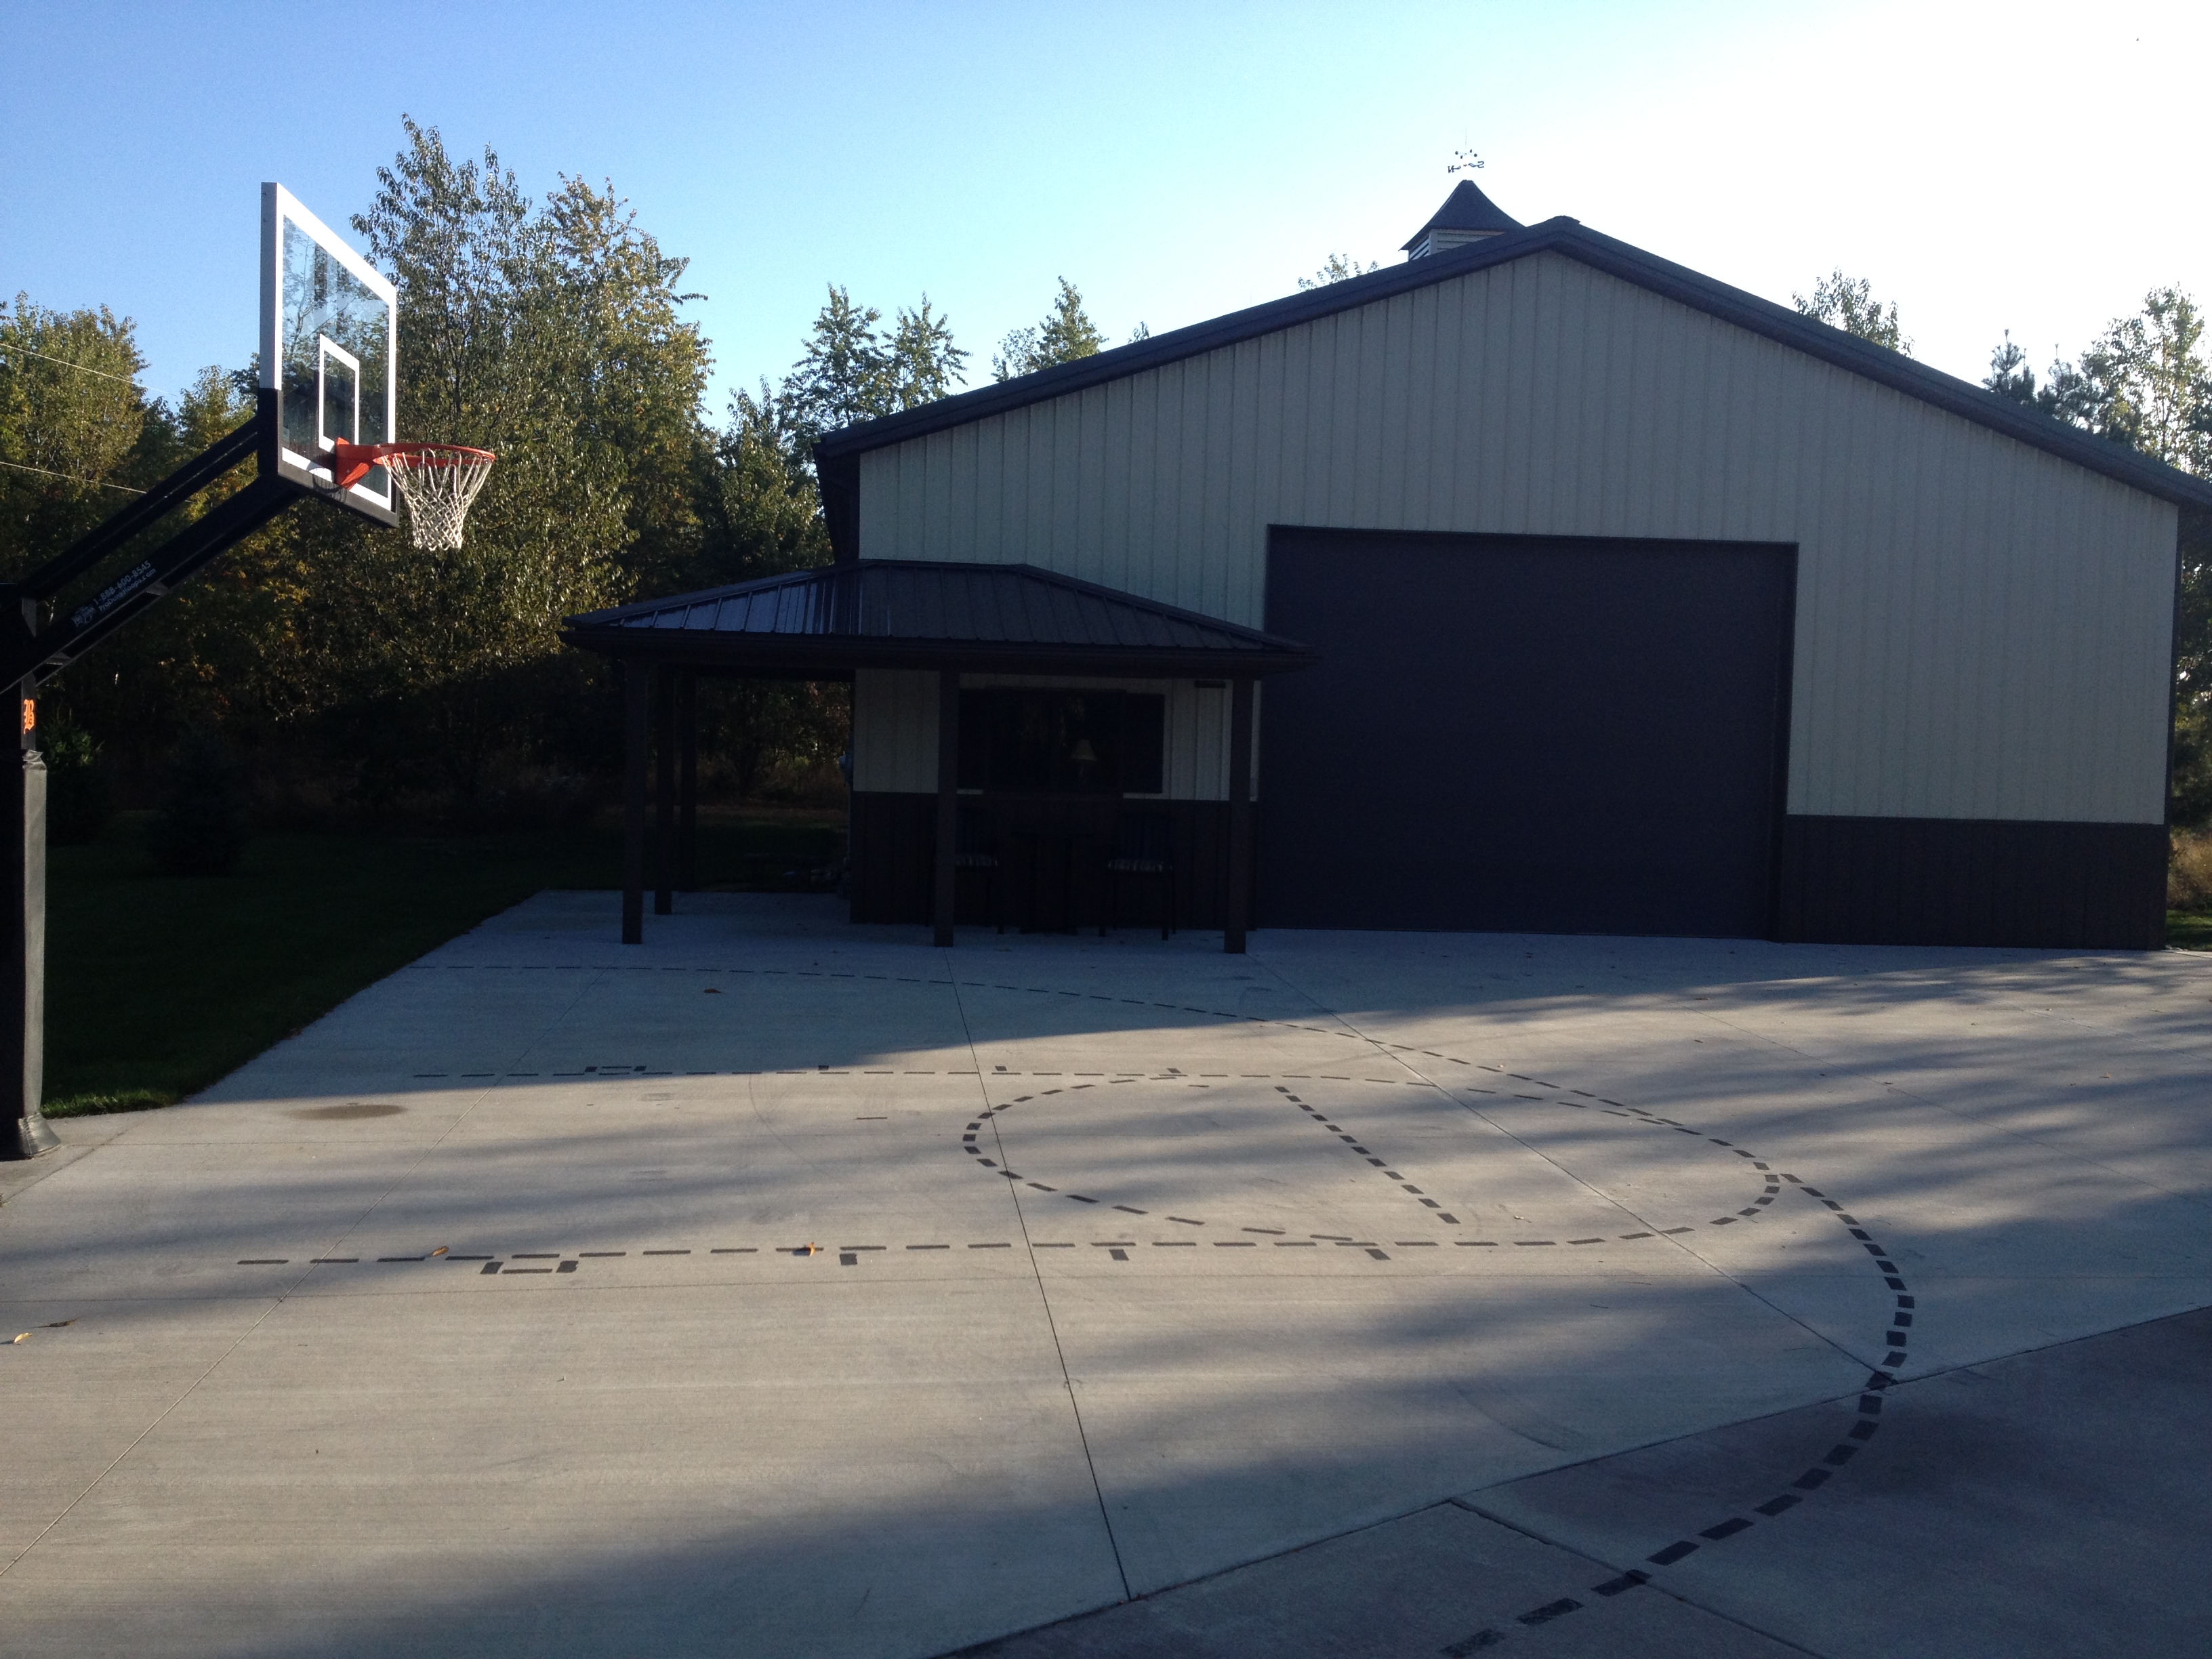 This side view shows the Pro Dunk Platinum Basketball system in front of this Michigan home's garage. 